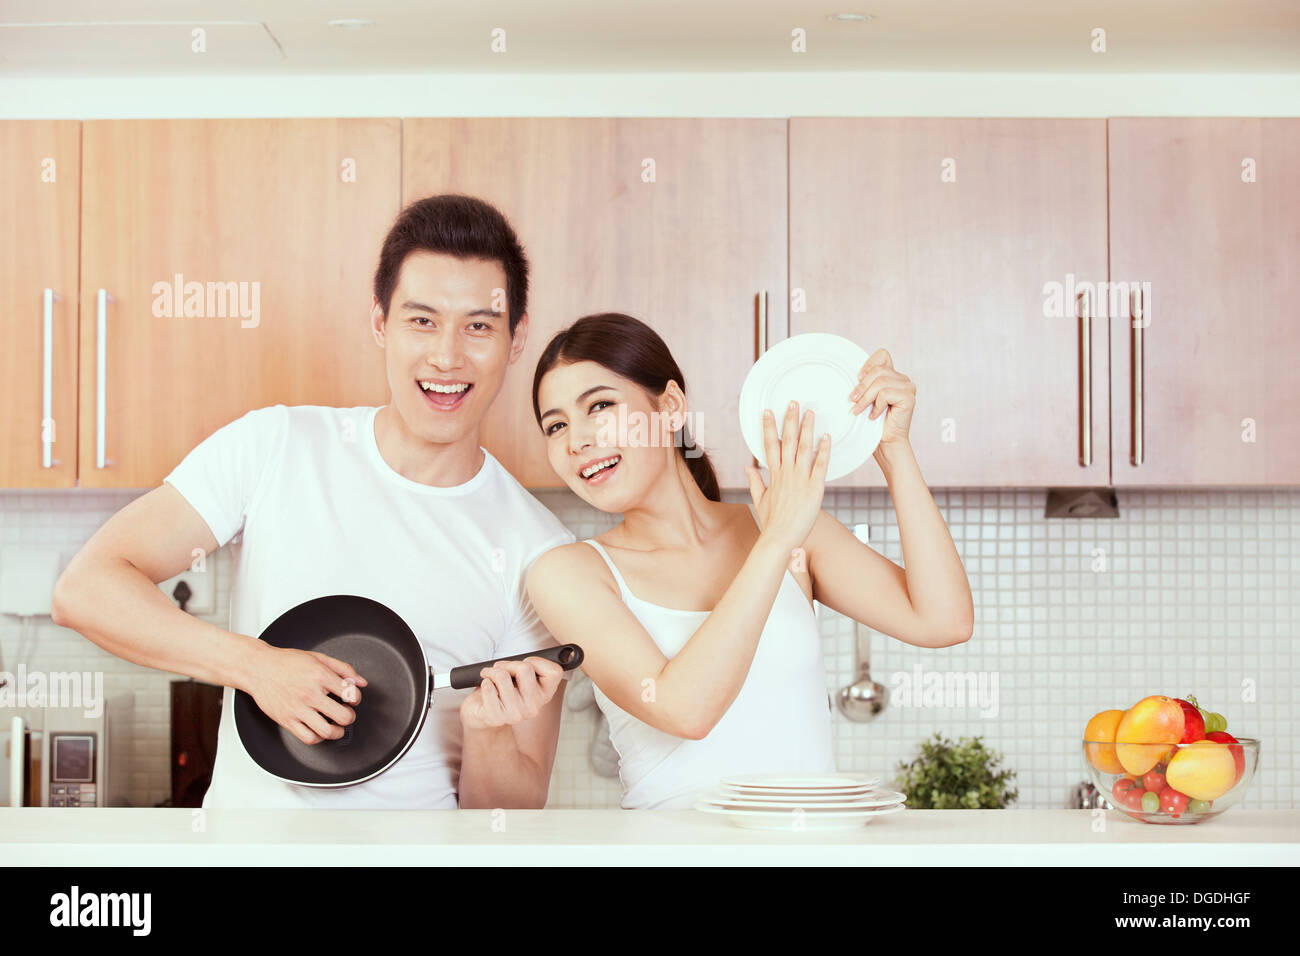 East Asian Young Couple Having Fun in Kitchen Stock Photo